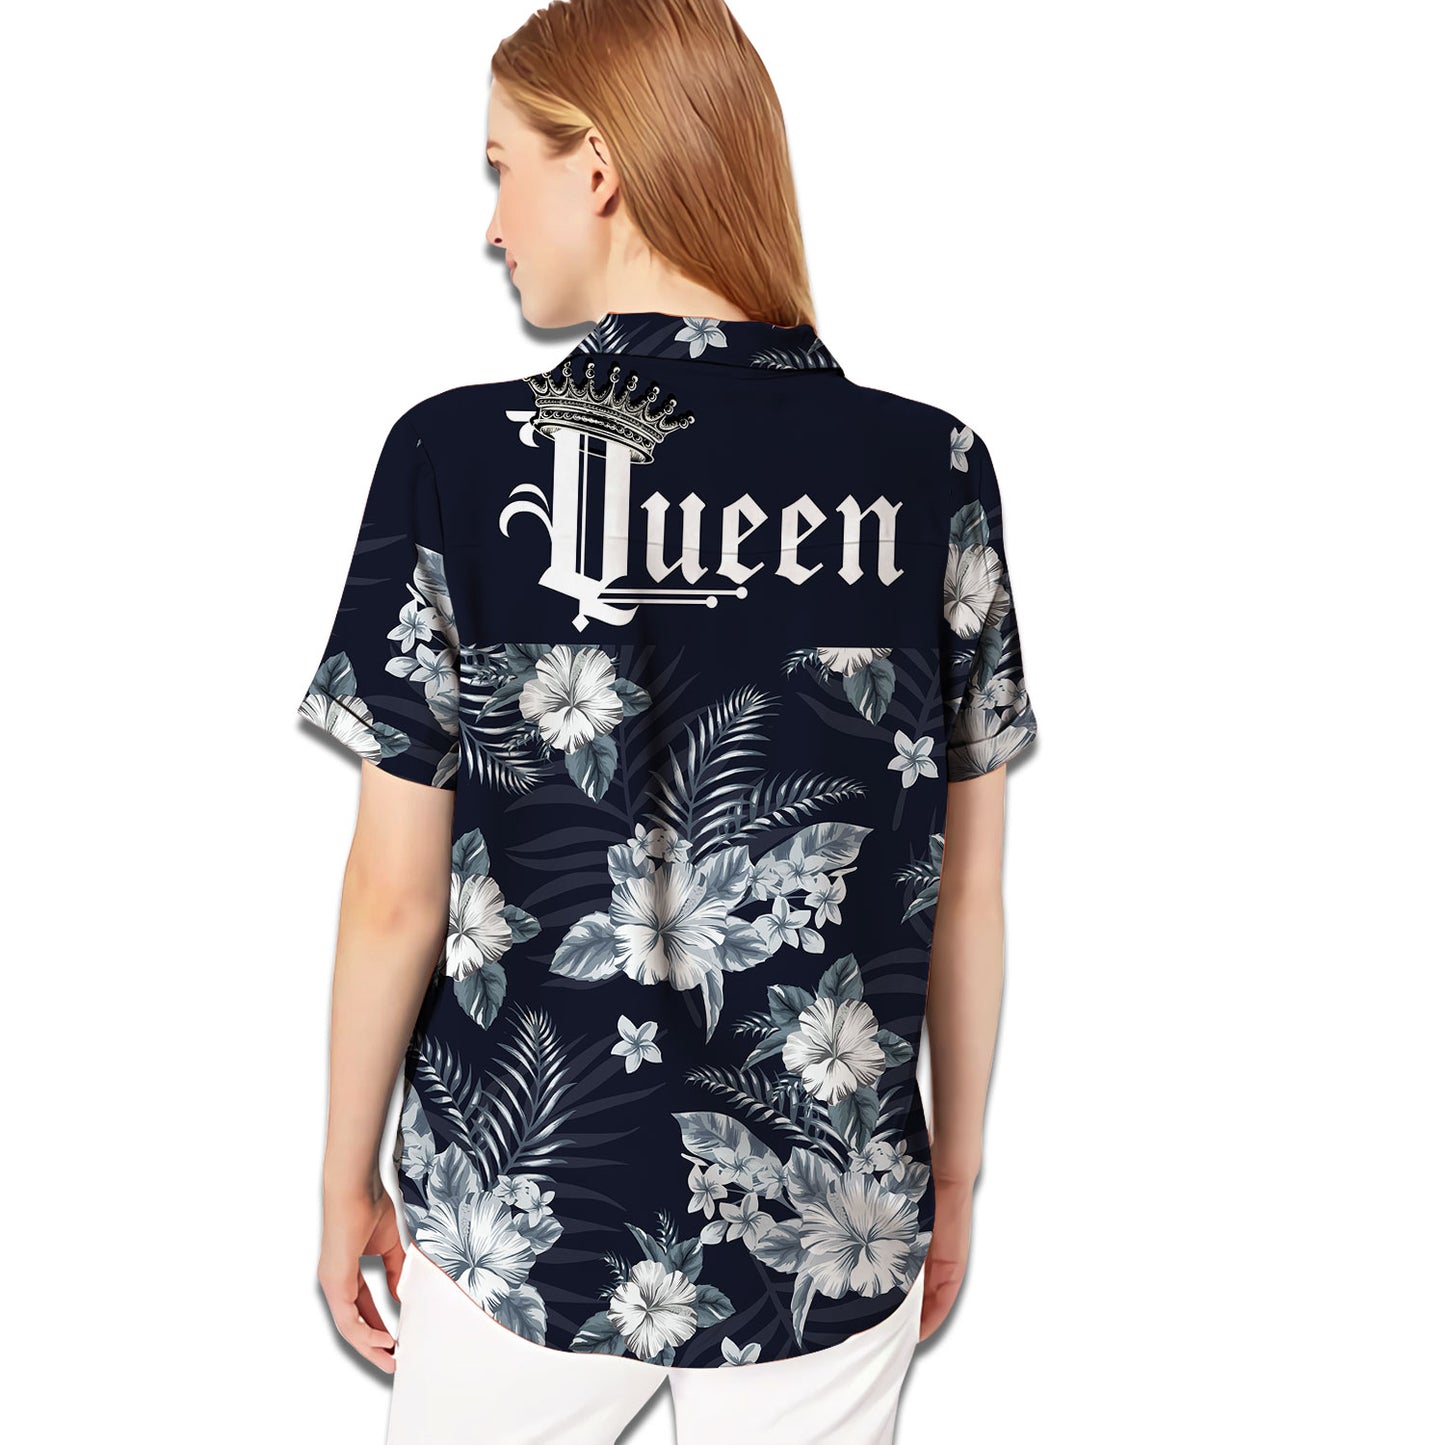 Royal King and Queen Matching Hawaiian Shirt Personalizedwitch For Couple